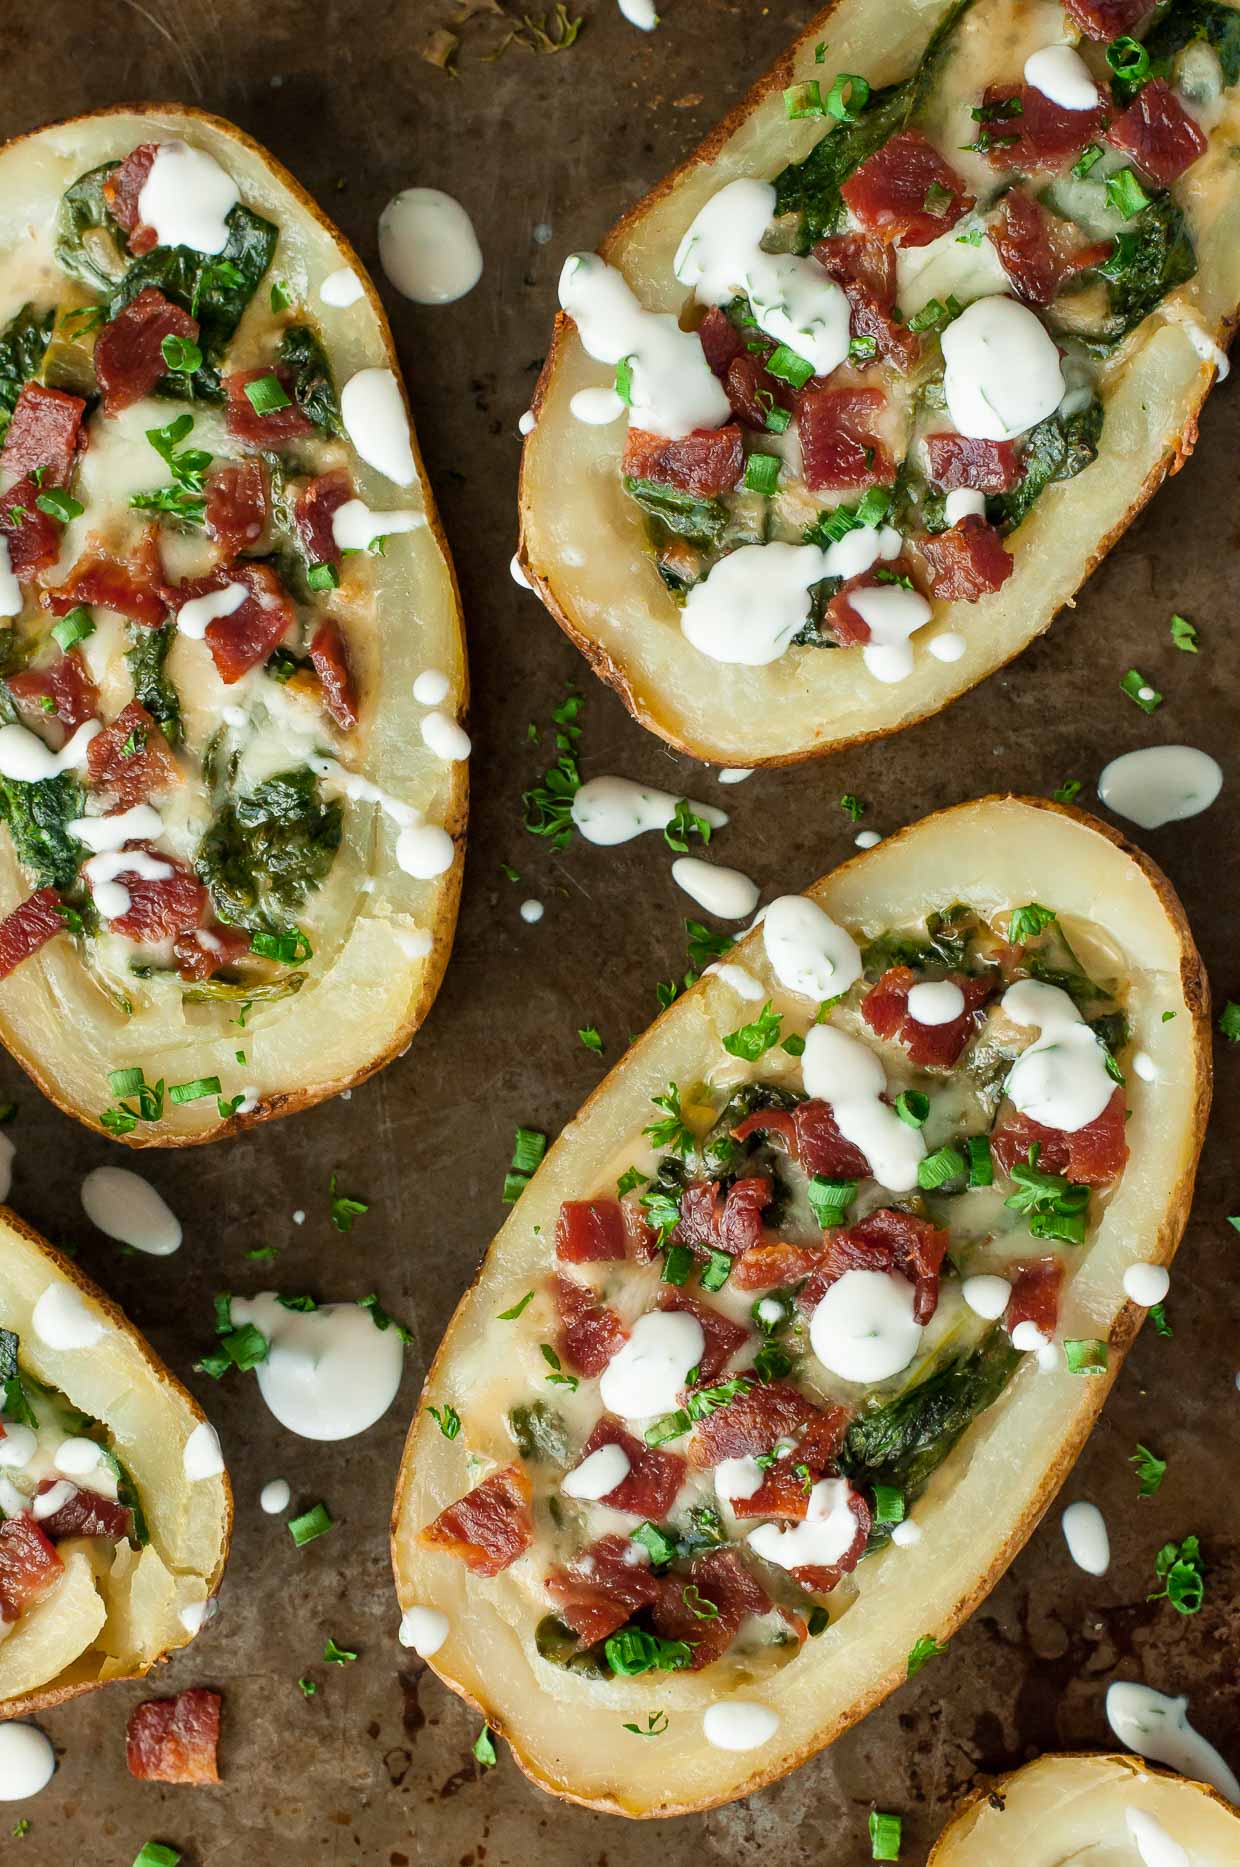 Creamy spinach artichoke dip and crispy loaded baked potato skins join forces, resulting in the ultimate party appetizer! We LOVE these loaded spinach artichoke potato skins!